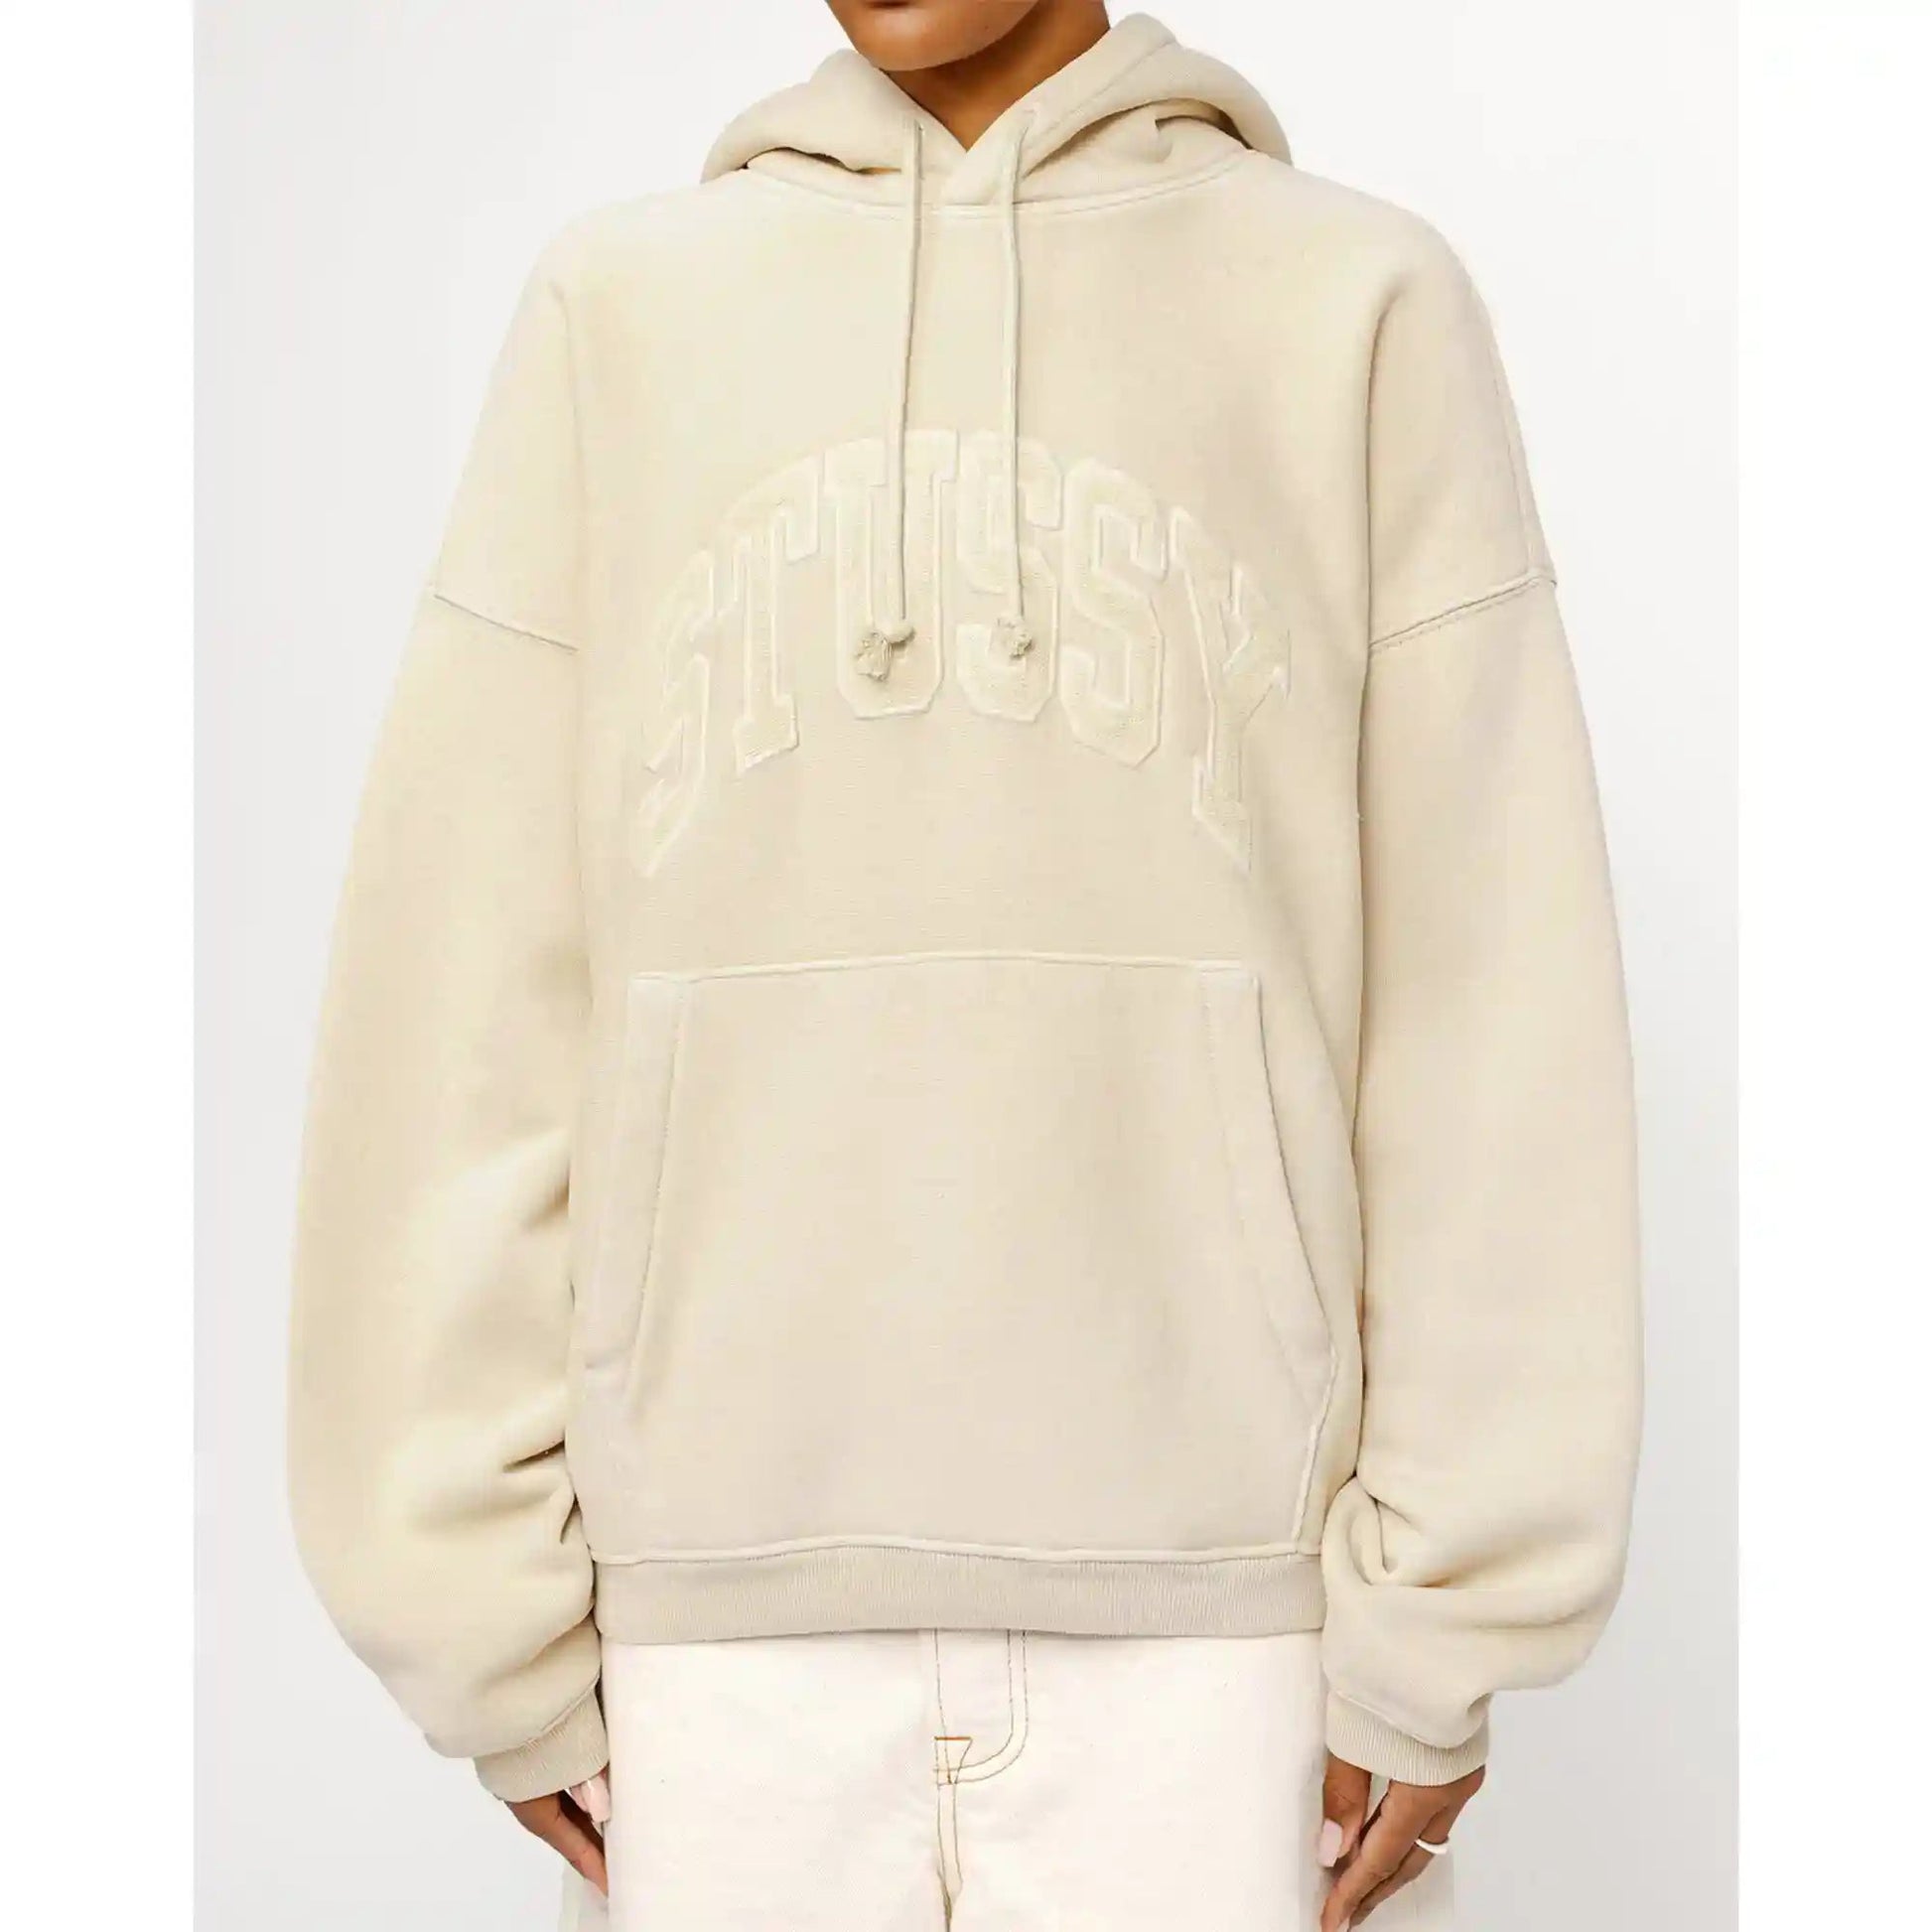 Stussy Embroidered Relaxed Hood, sand - Tiki Room Skateboards - 9